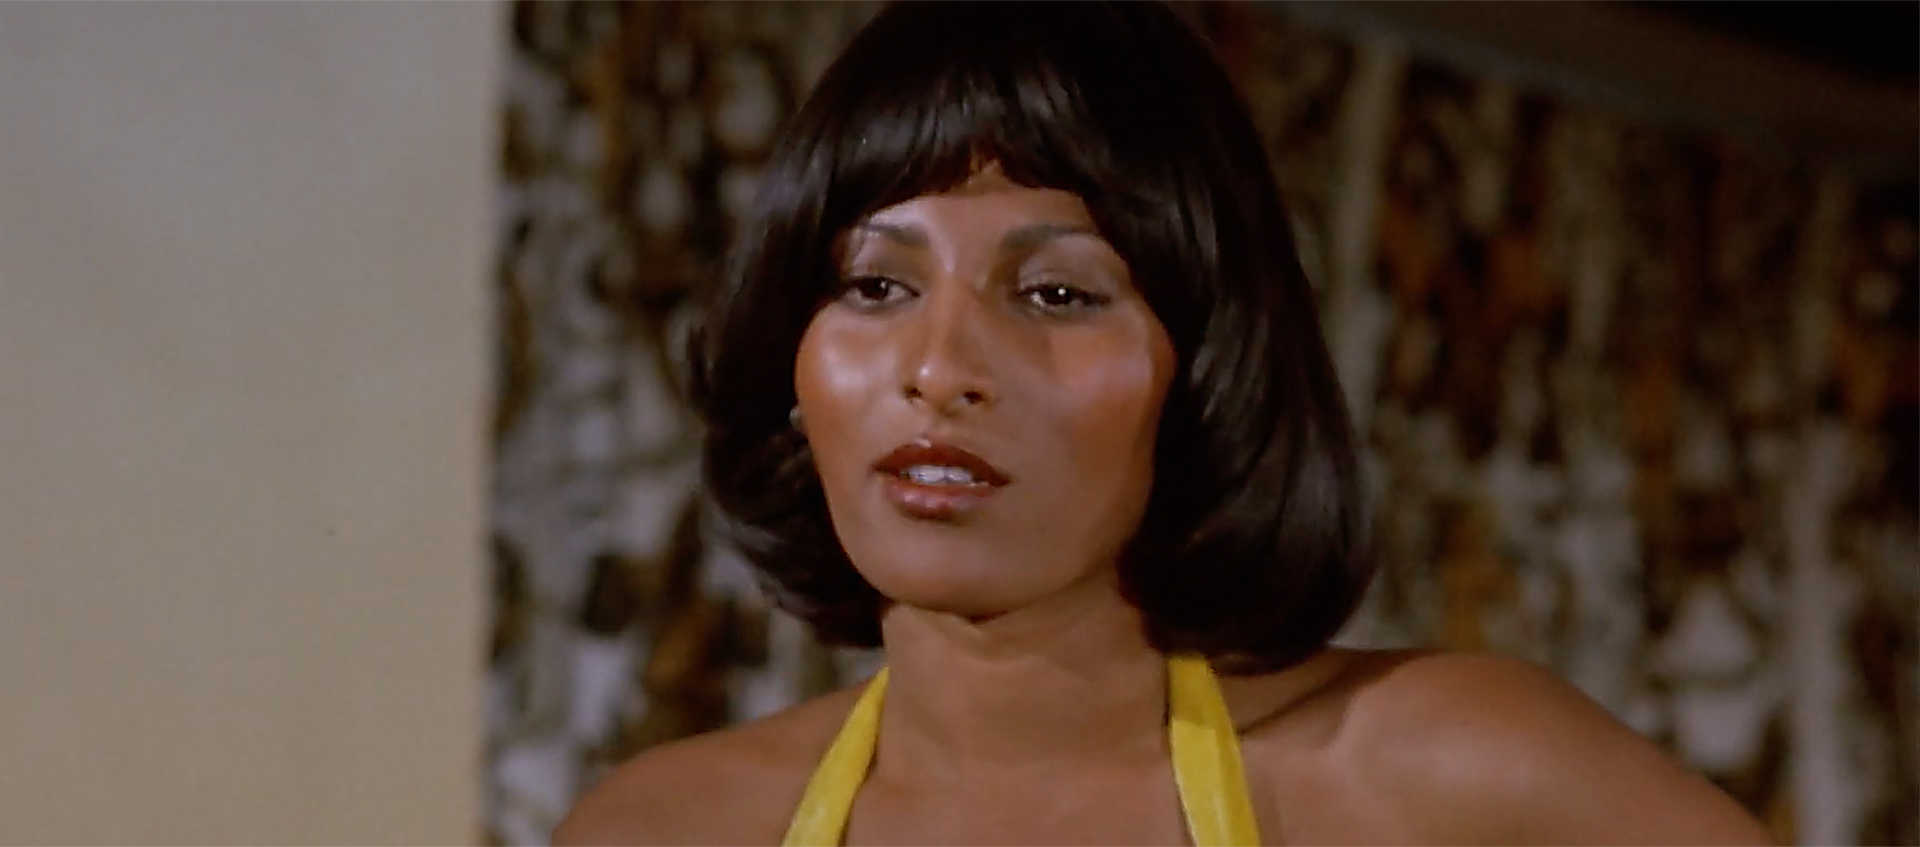 Pam Grier from the shoulders up. She has medium brown skin and a dark brown bob with bangs and wears a yellow halter top.